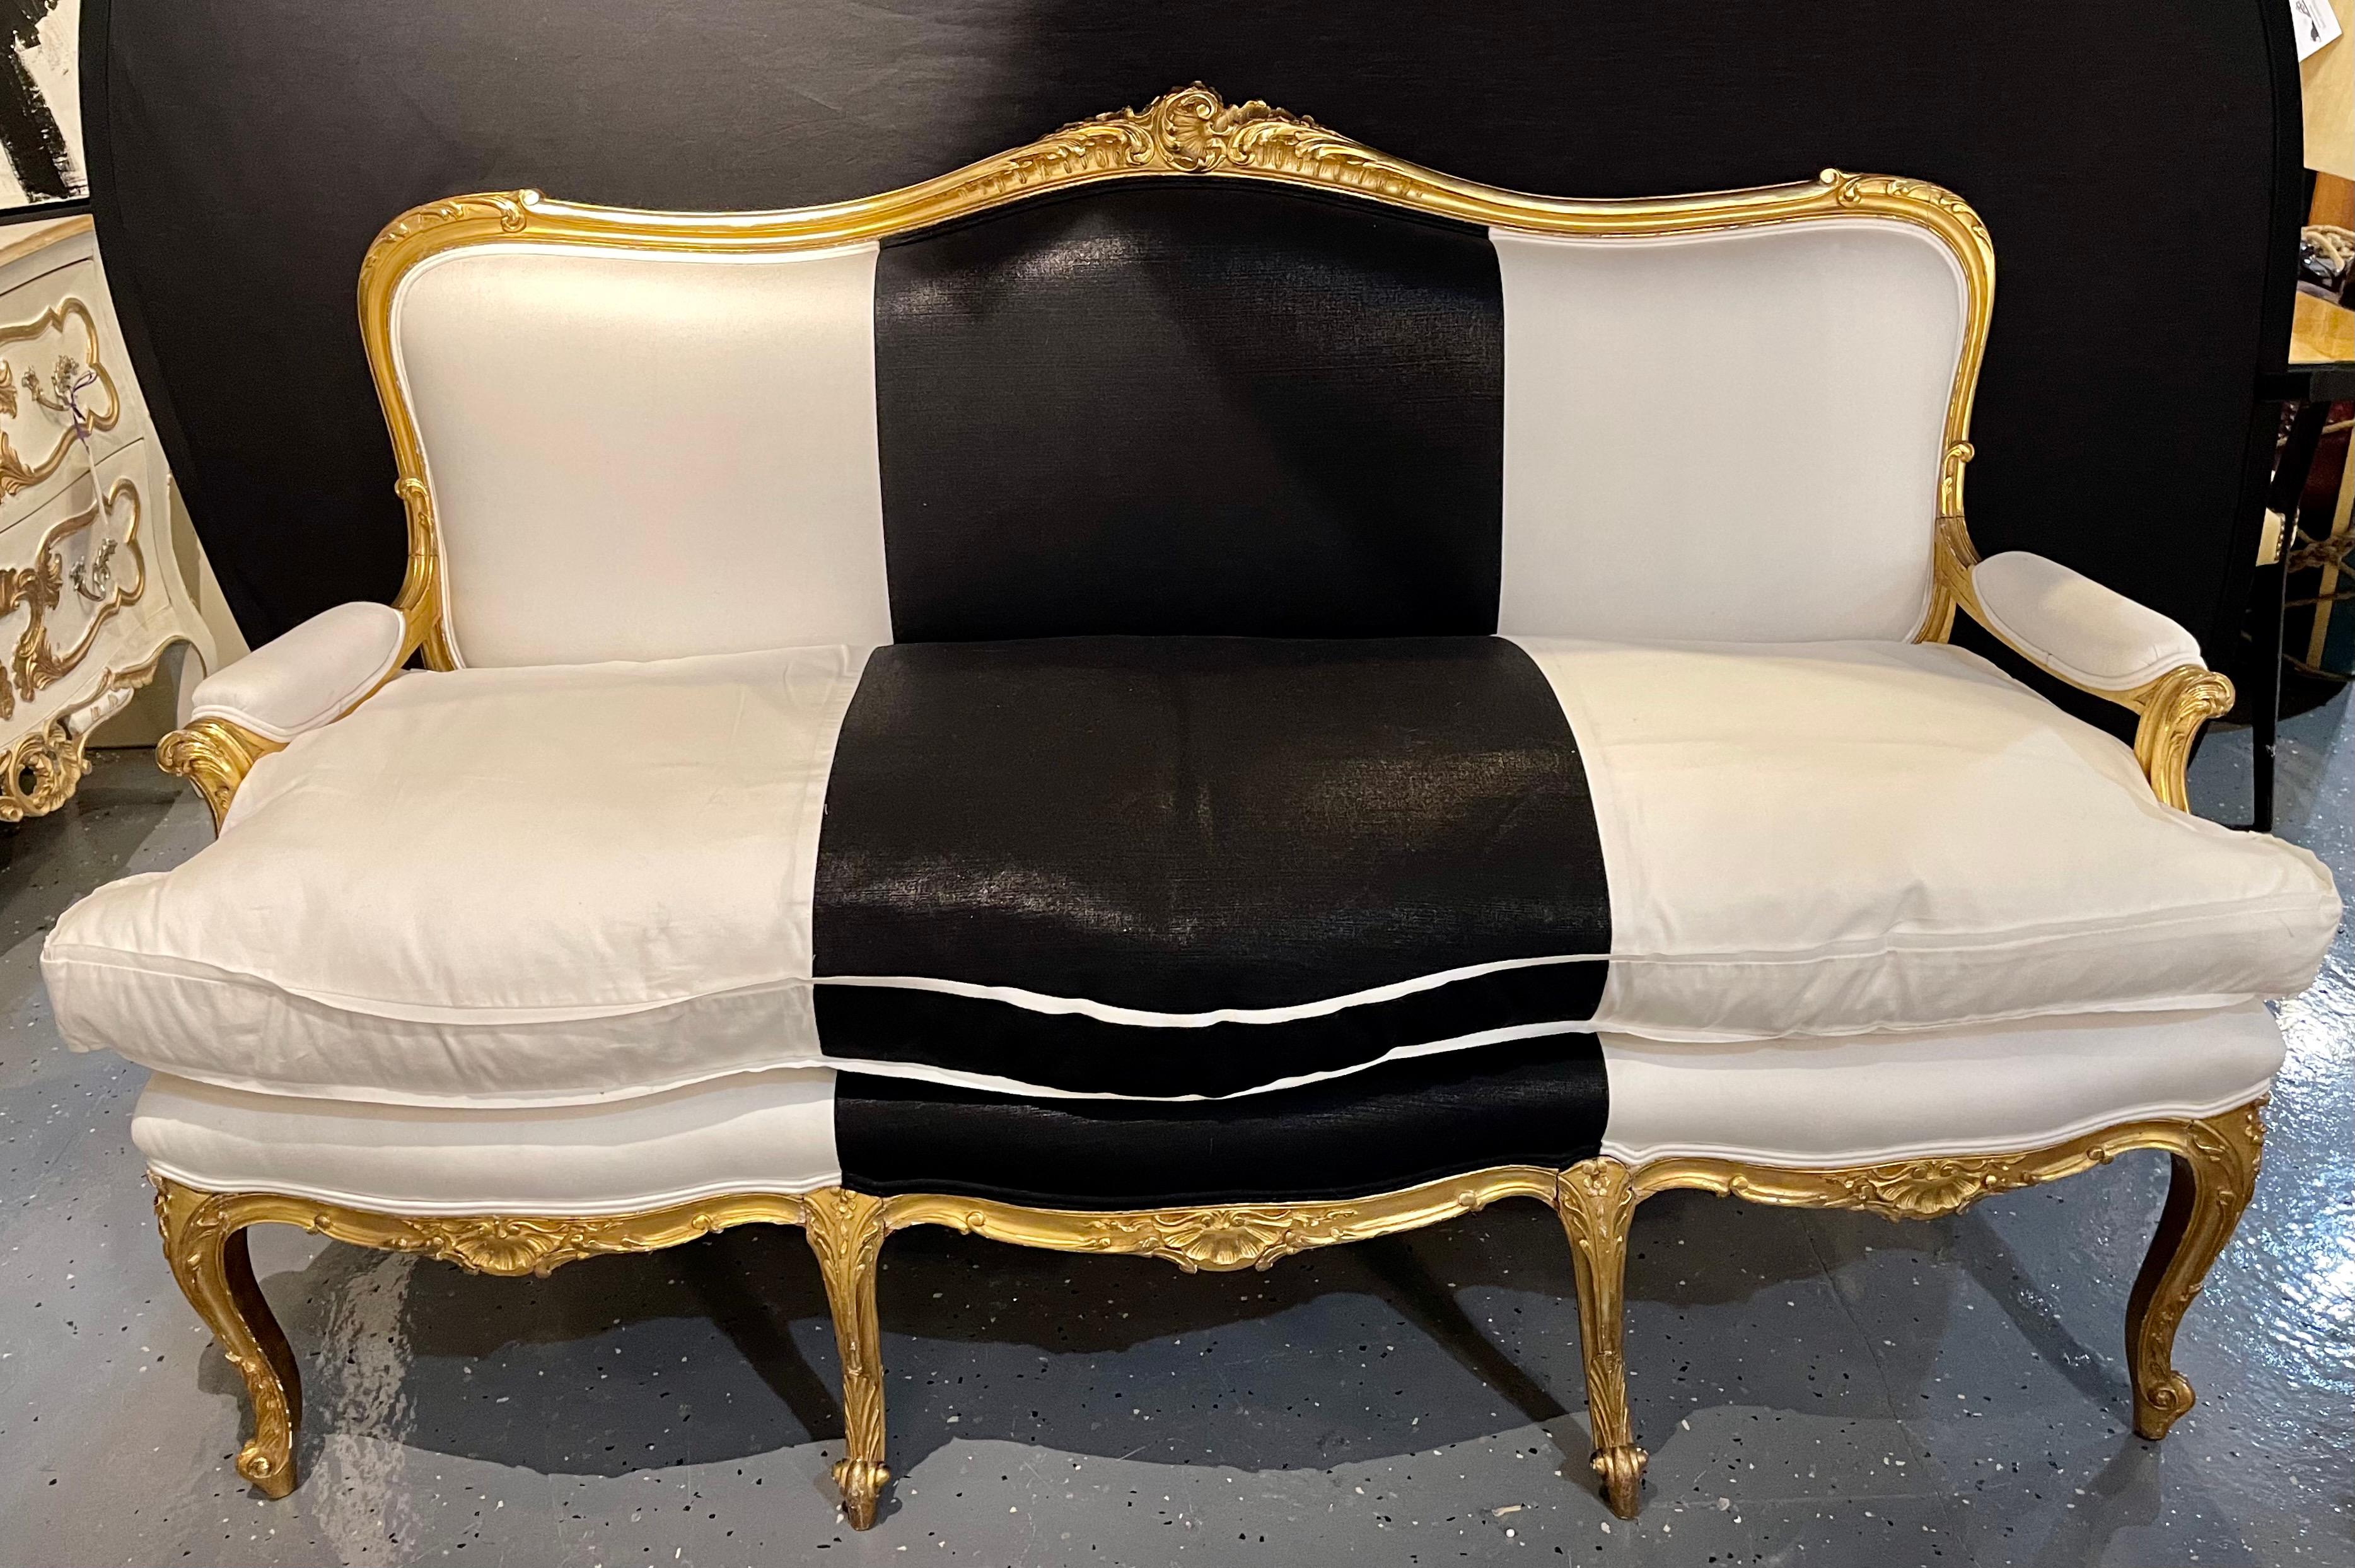 1930s French gilt wood upholstered settee, canape or sofa in black and white polished cotton. One of a compatible pair of finely carved and detailed water gilt decorated Louis xv style canapes or loveseat sofas.
A simply stunning compatible pair